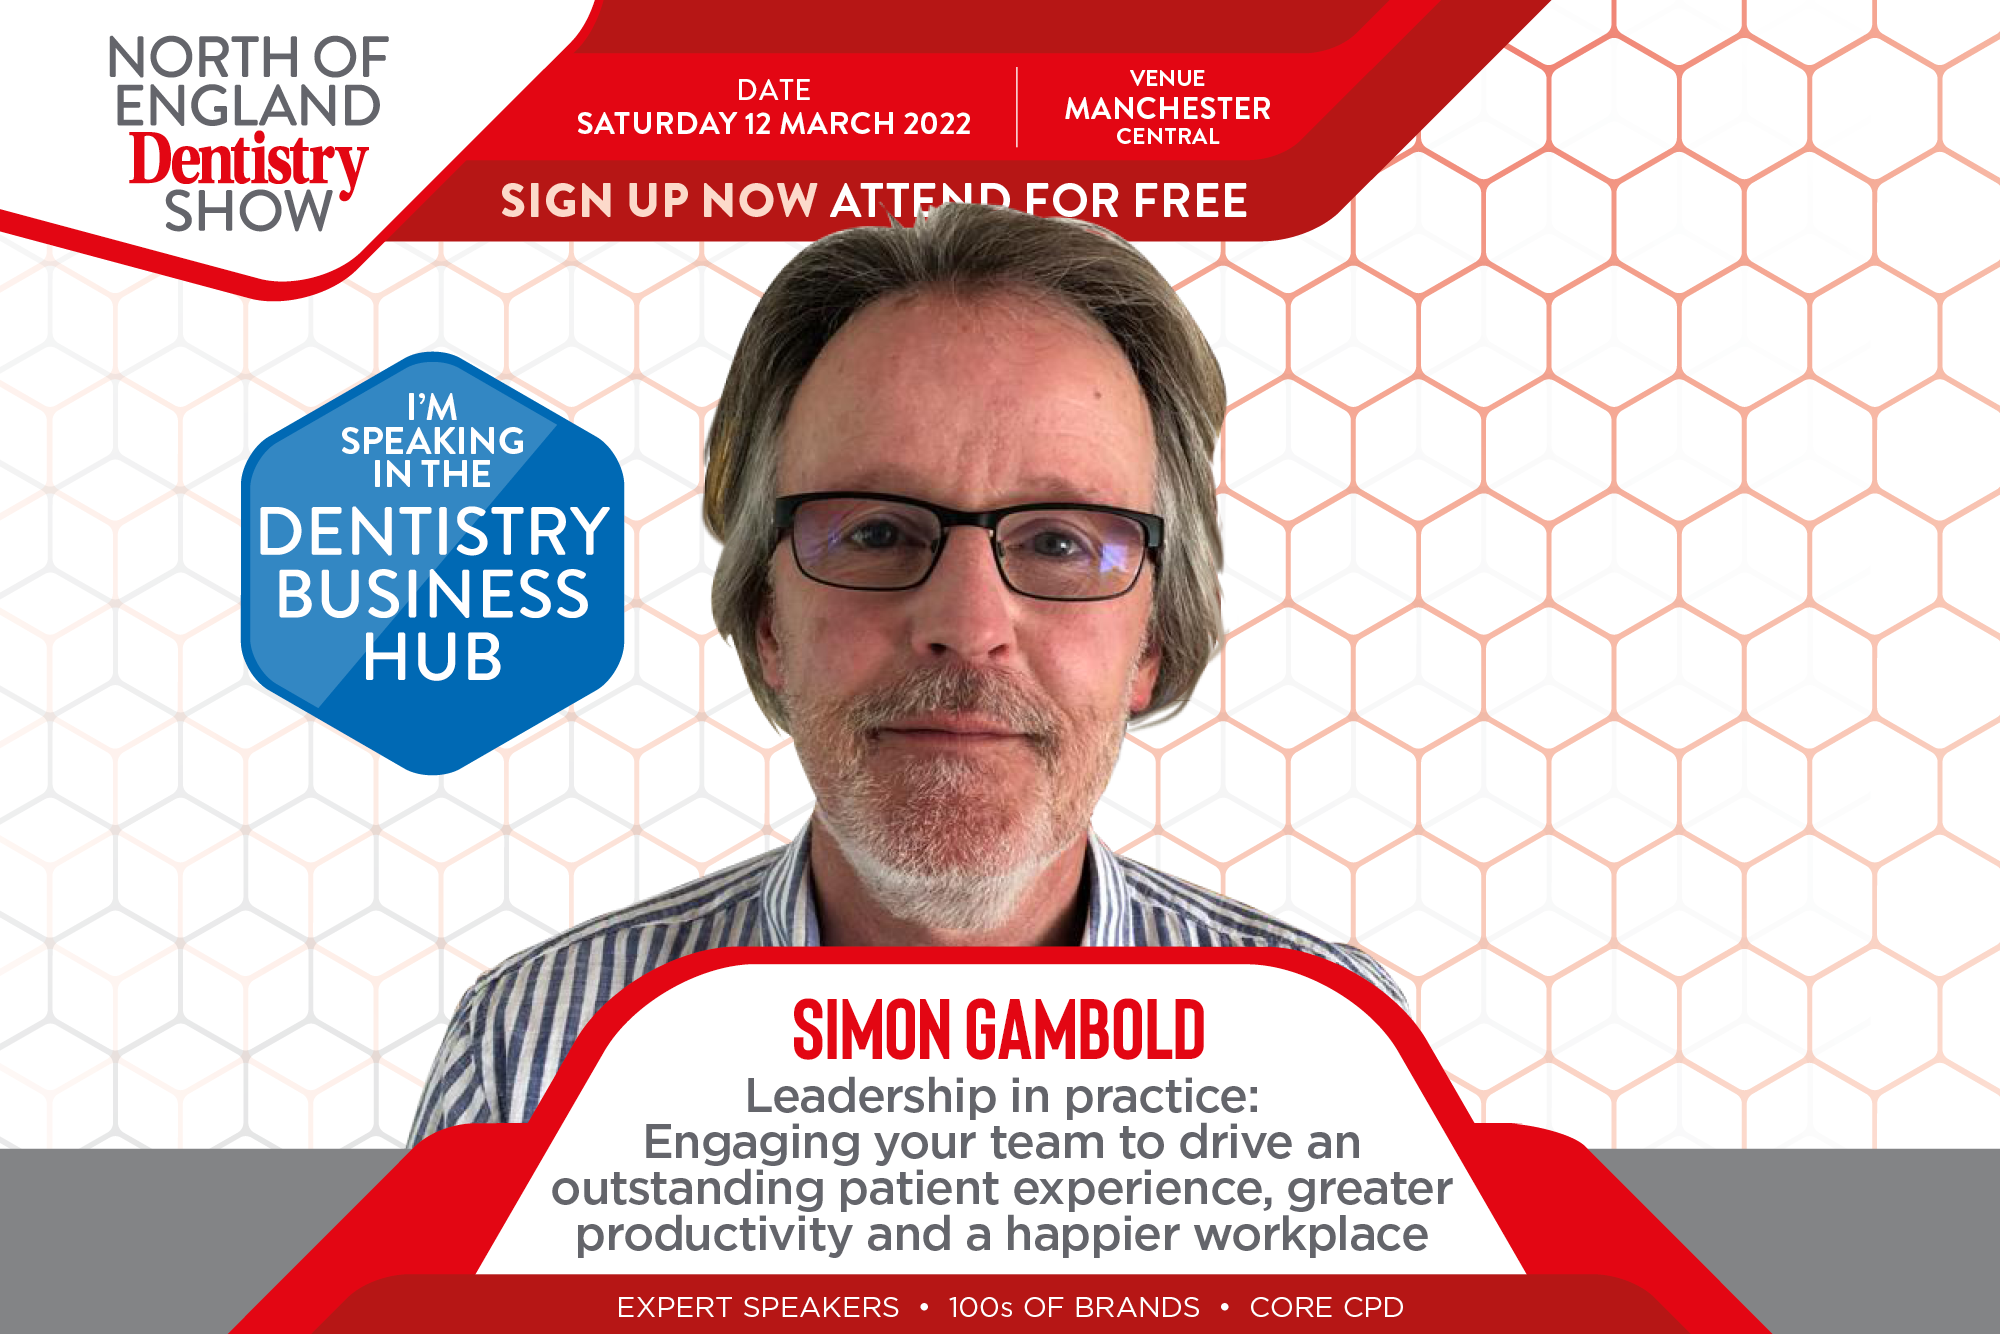 North of England Dentistry Show – Simon Gambold